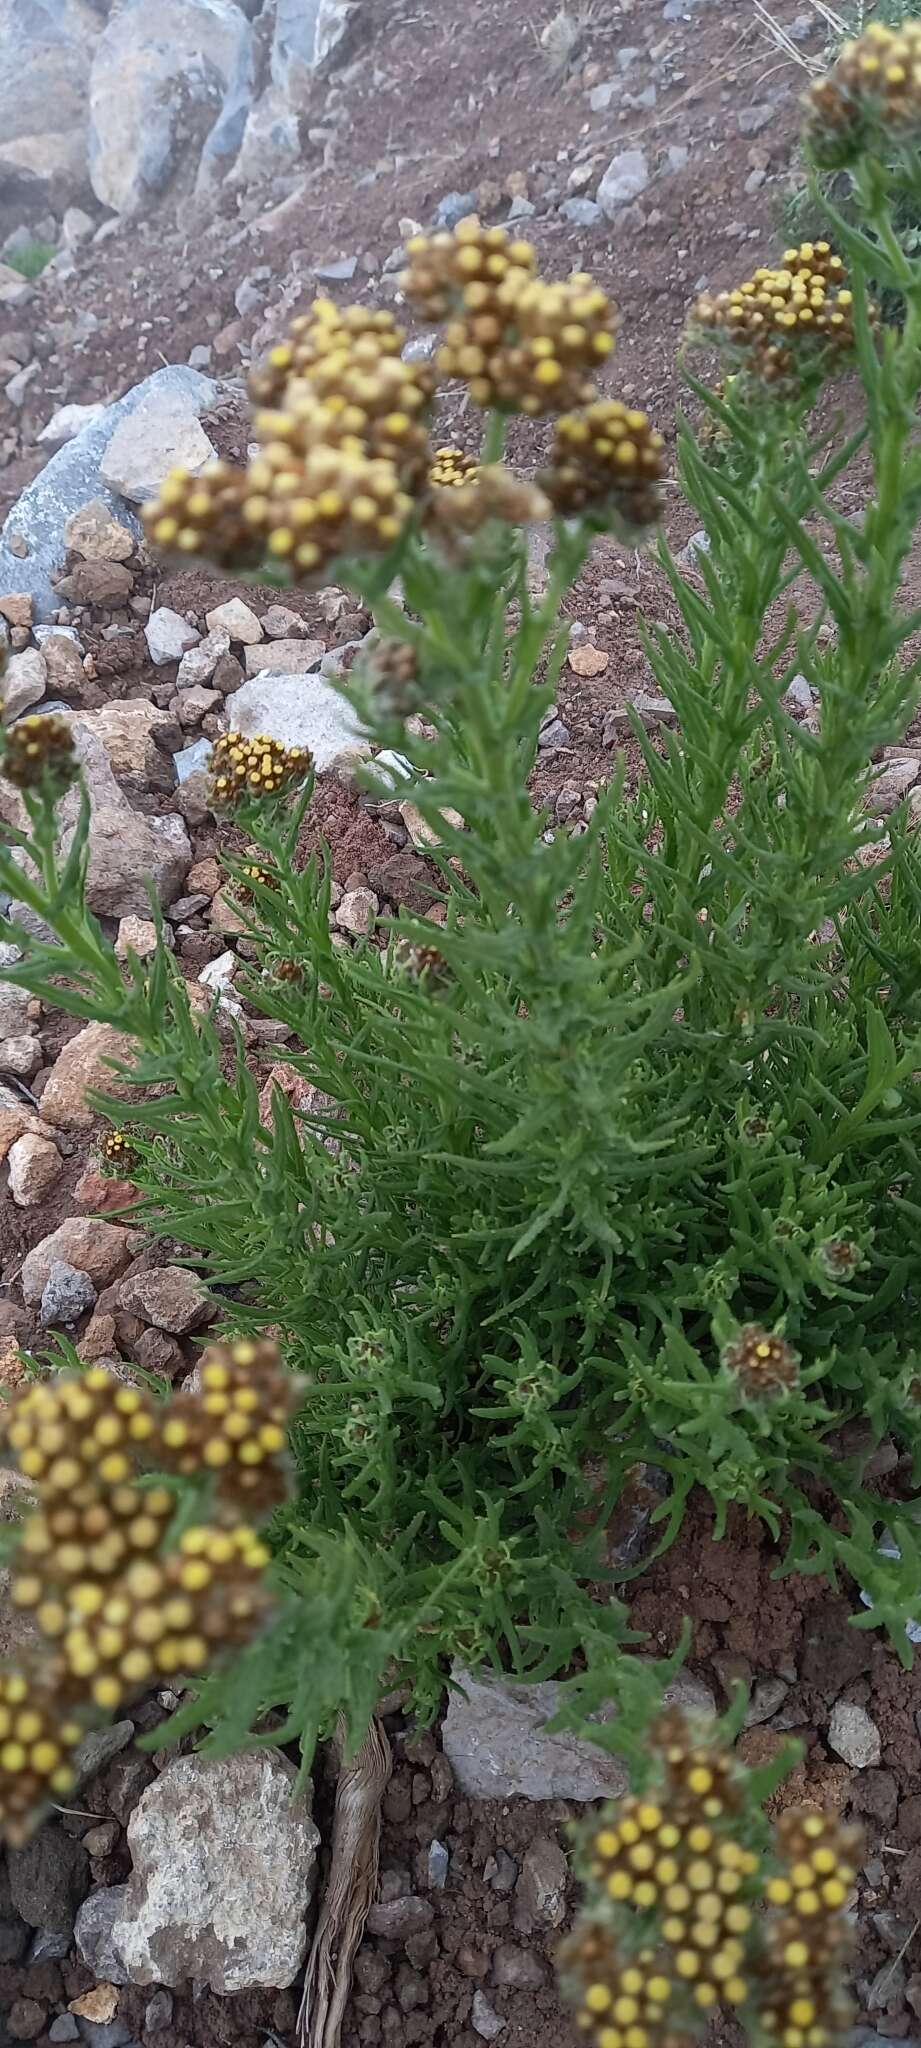 Image of Dominican cudweed